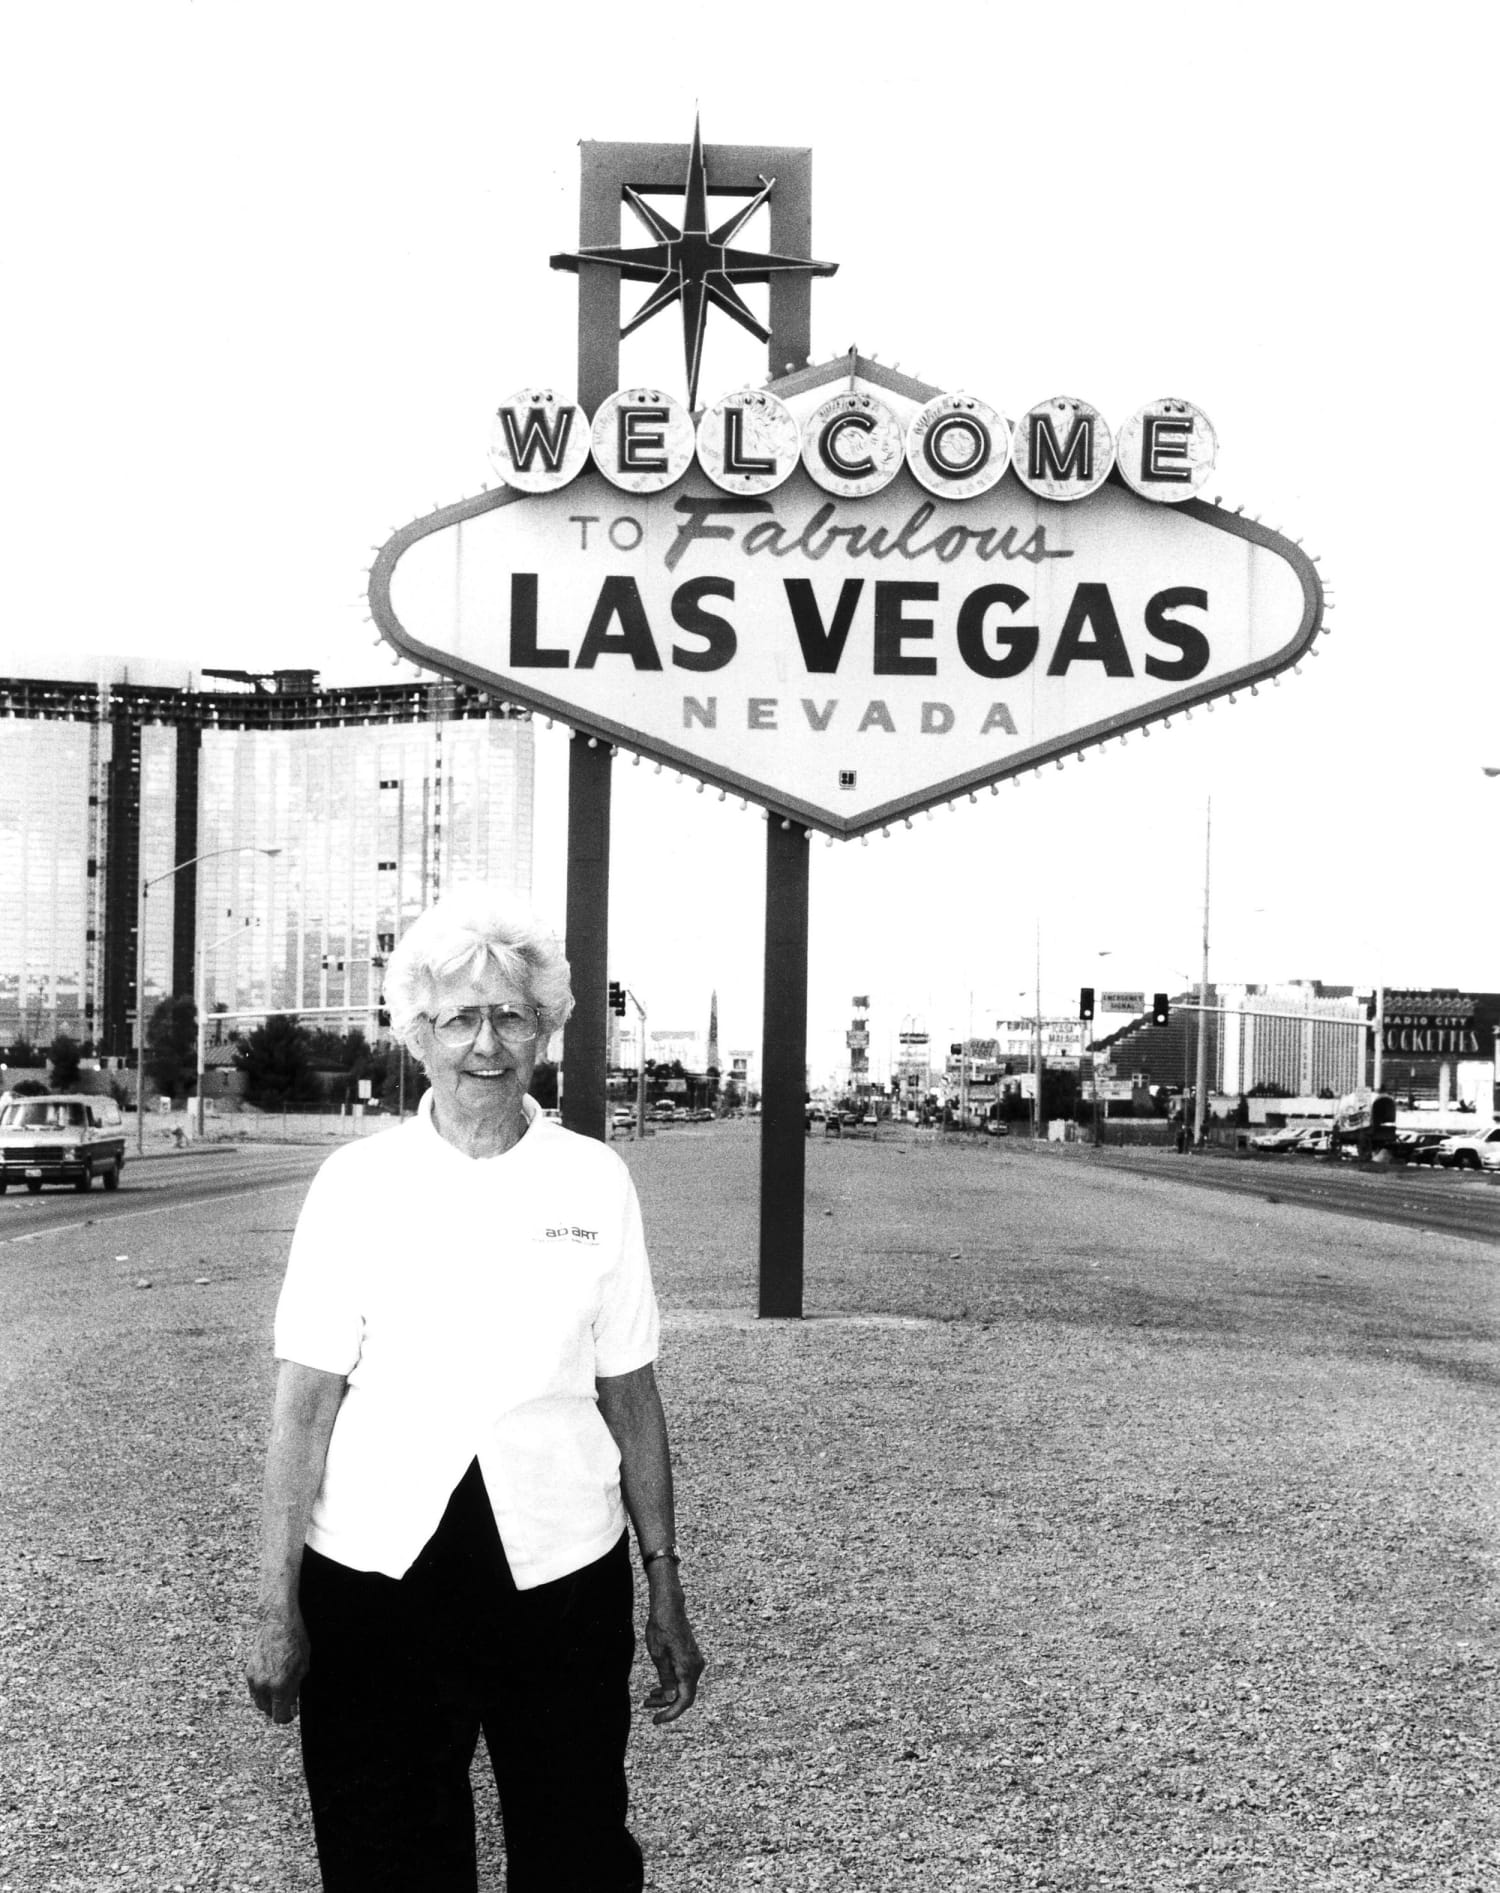 Welcome to Fabulous Las Vegas sign - Location & directions